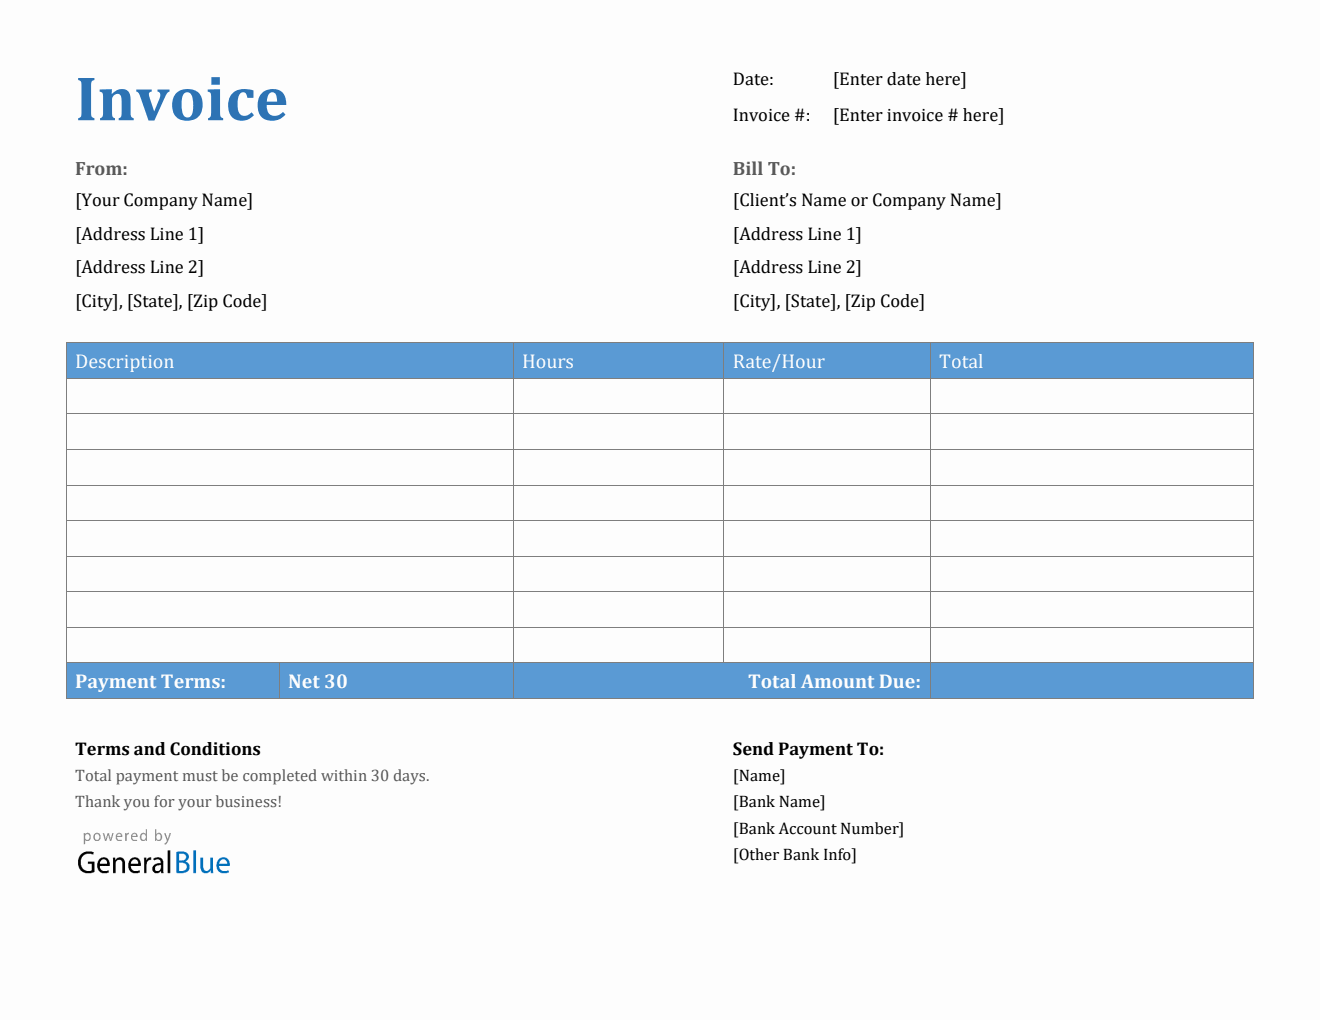 Invoice Template for U.S. Freelancers in Word (Printable)